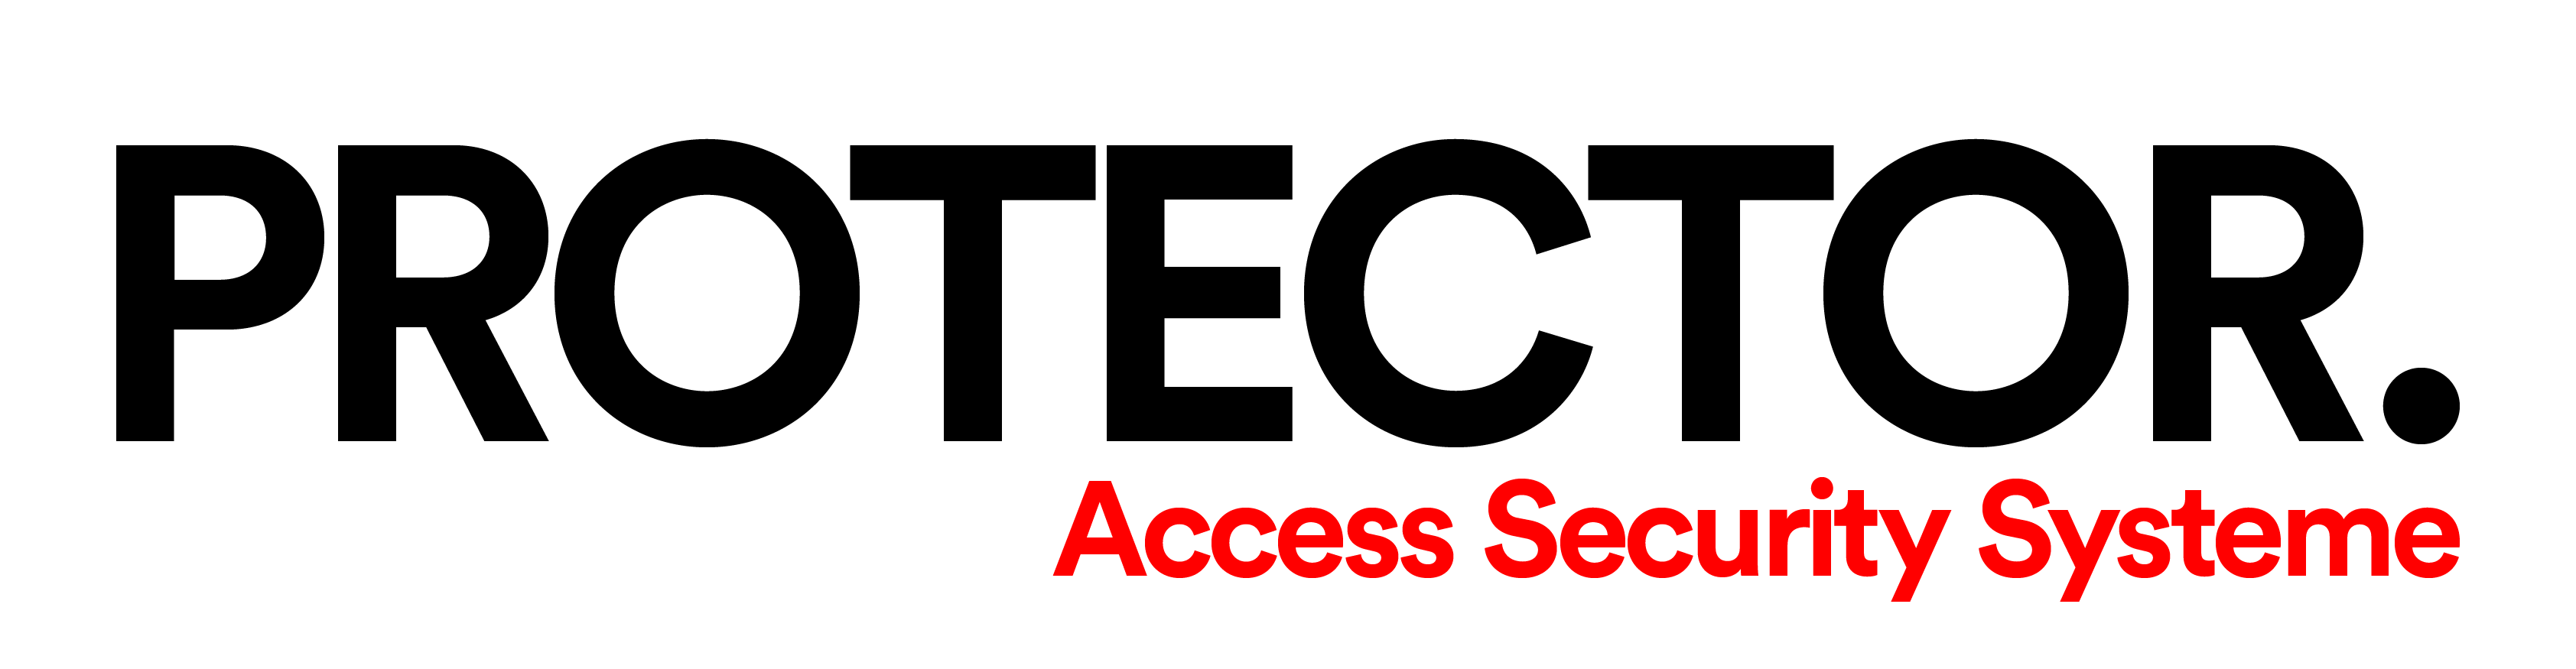 Protected access